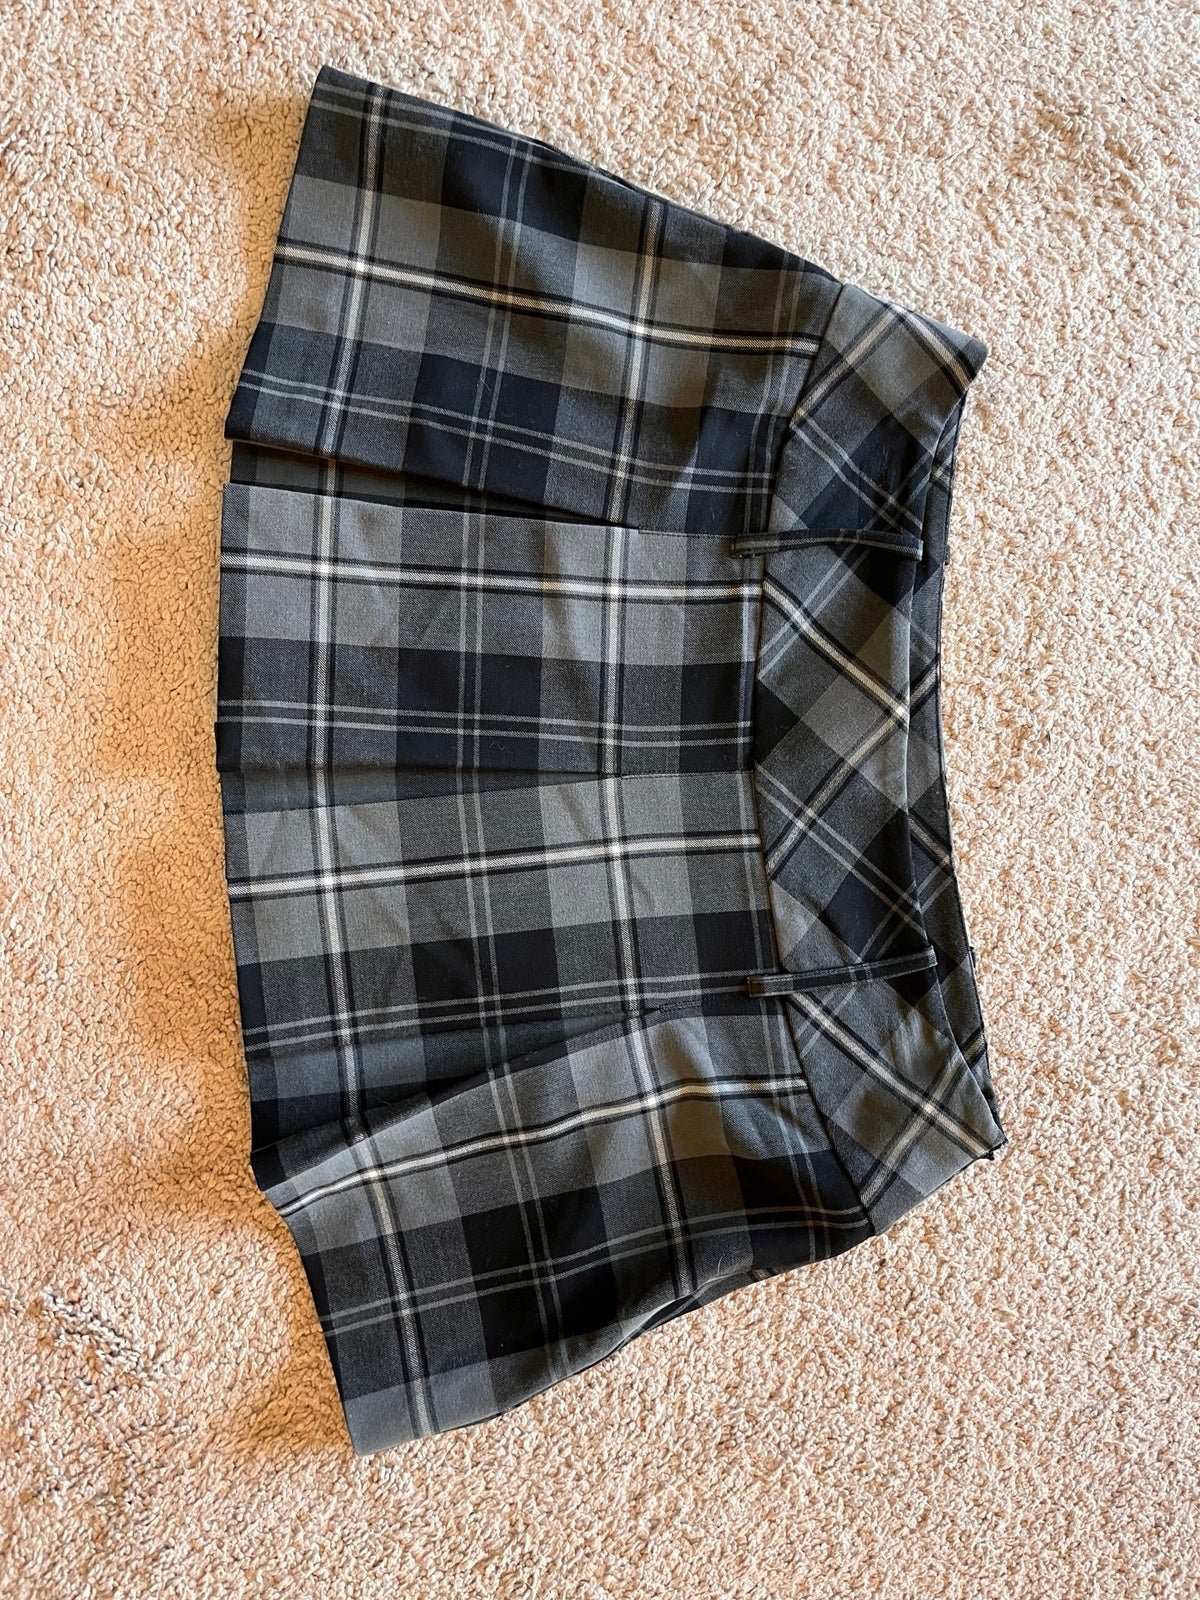 good price Candies pleated plaid skirt size 11 nkOF1tW6